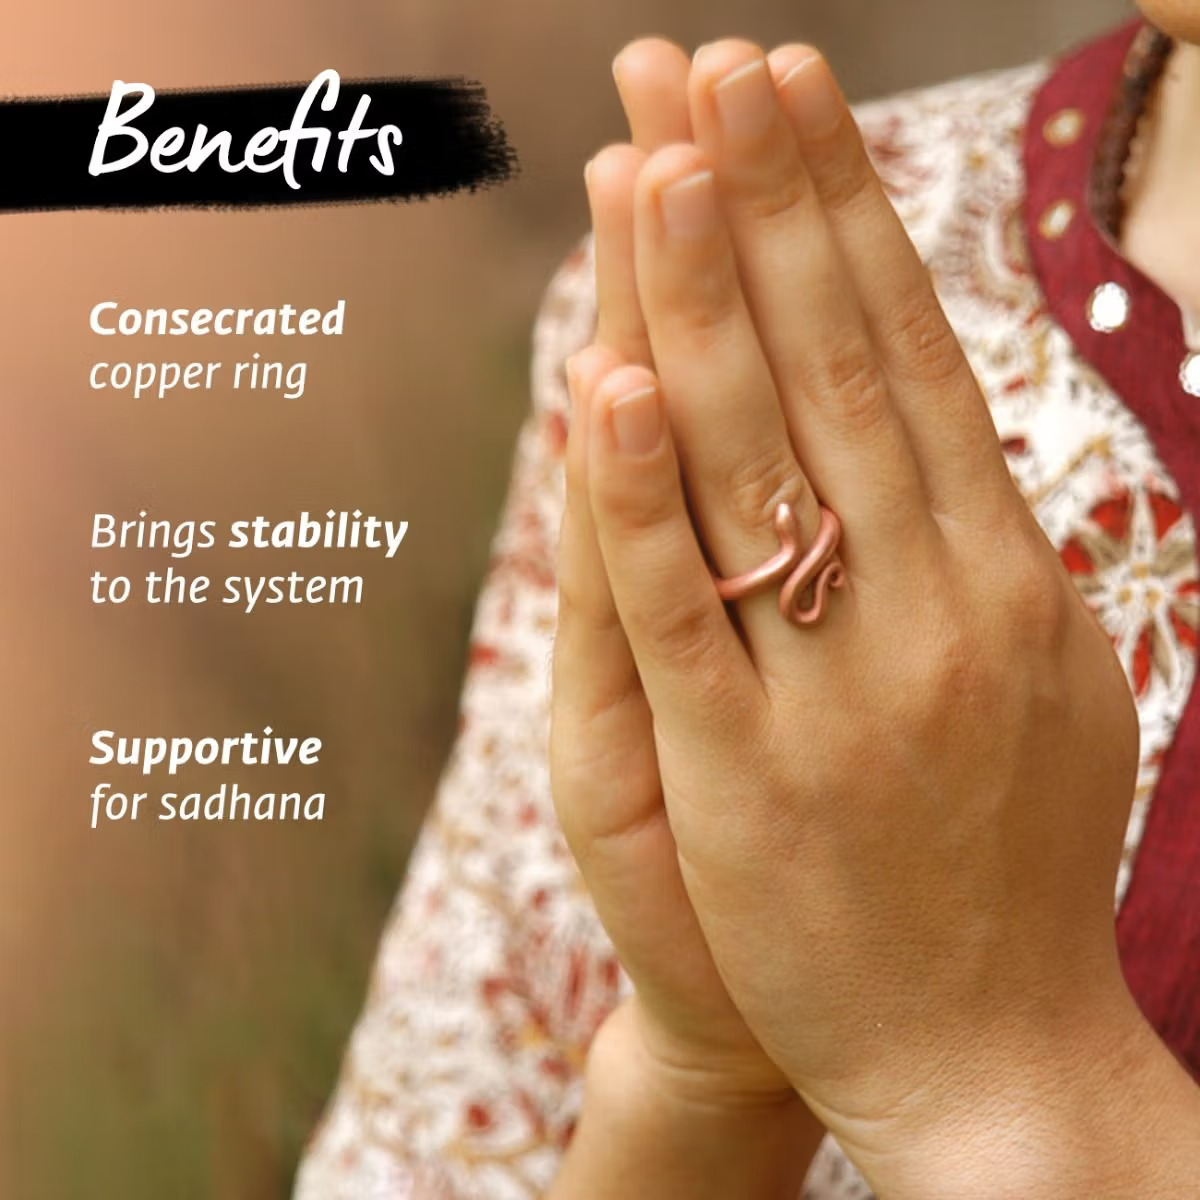 Copper Snake Ring Provides the Fundamental Support, Copper Snake Ring,sarpa  Sutra, Copper Consecrated Snake Ring, Copper Snake Ring Benefits - Etsy  Norway